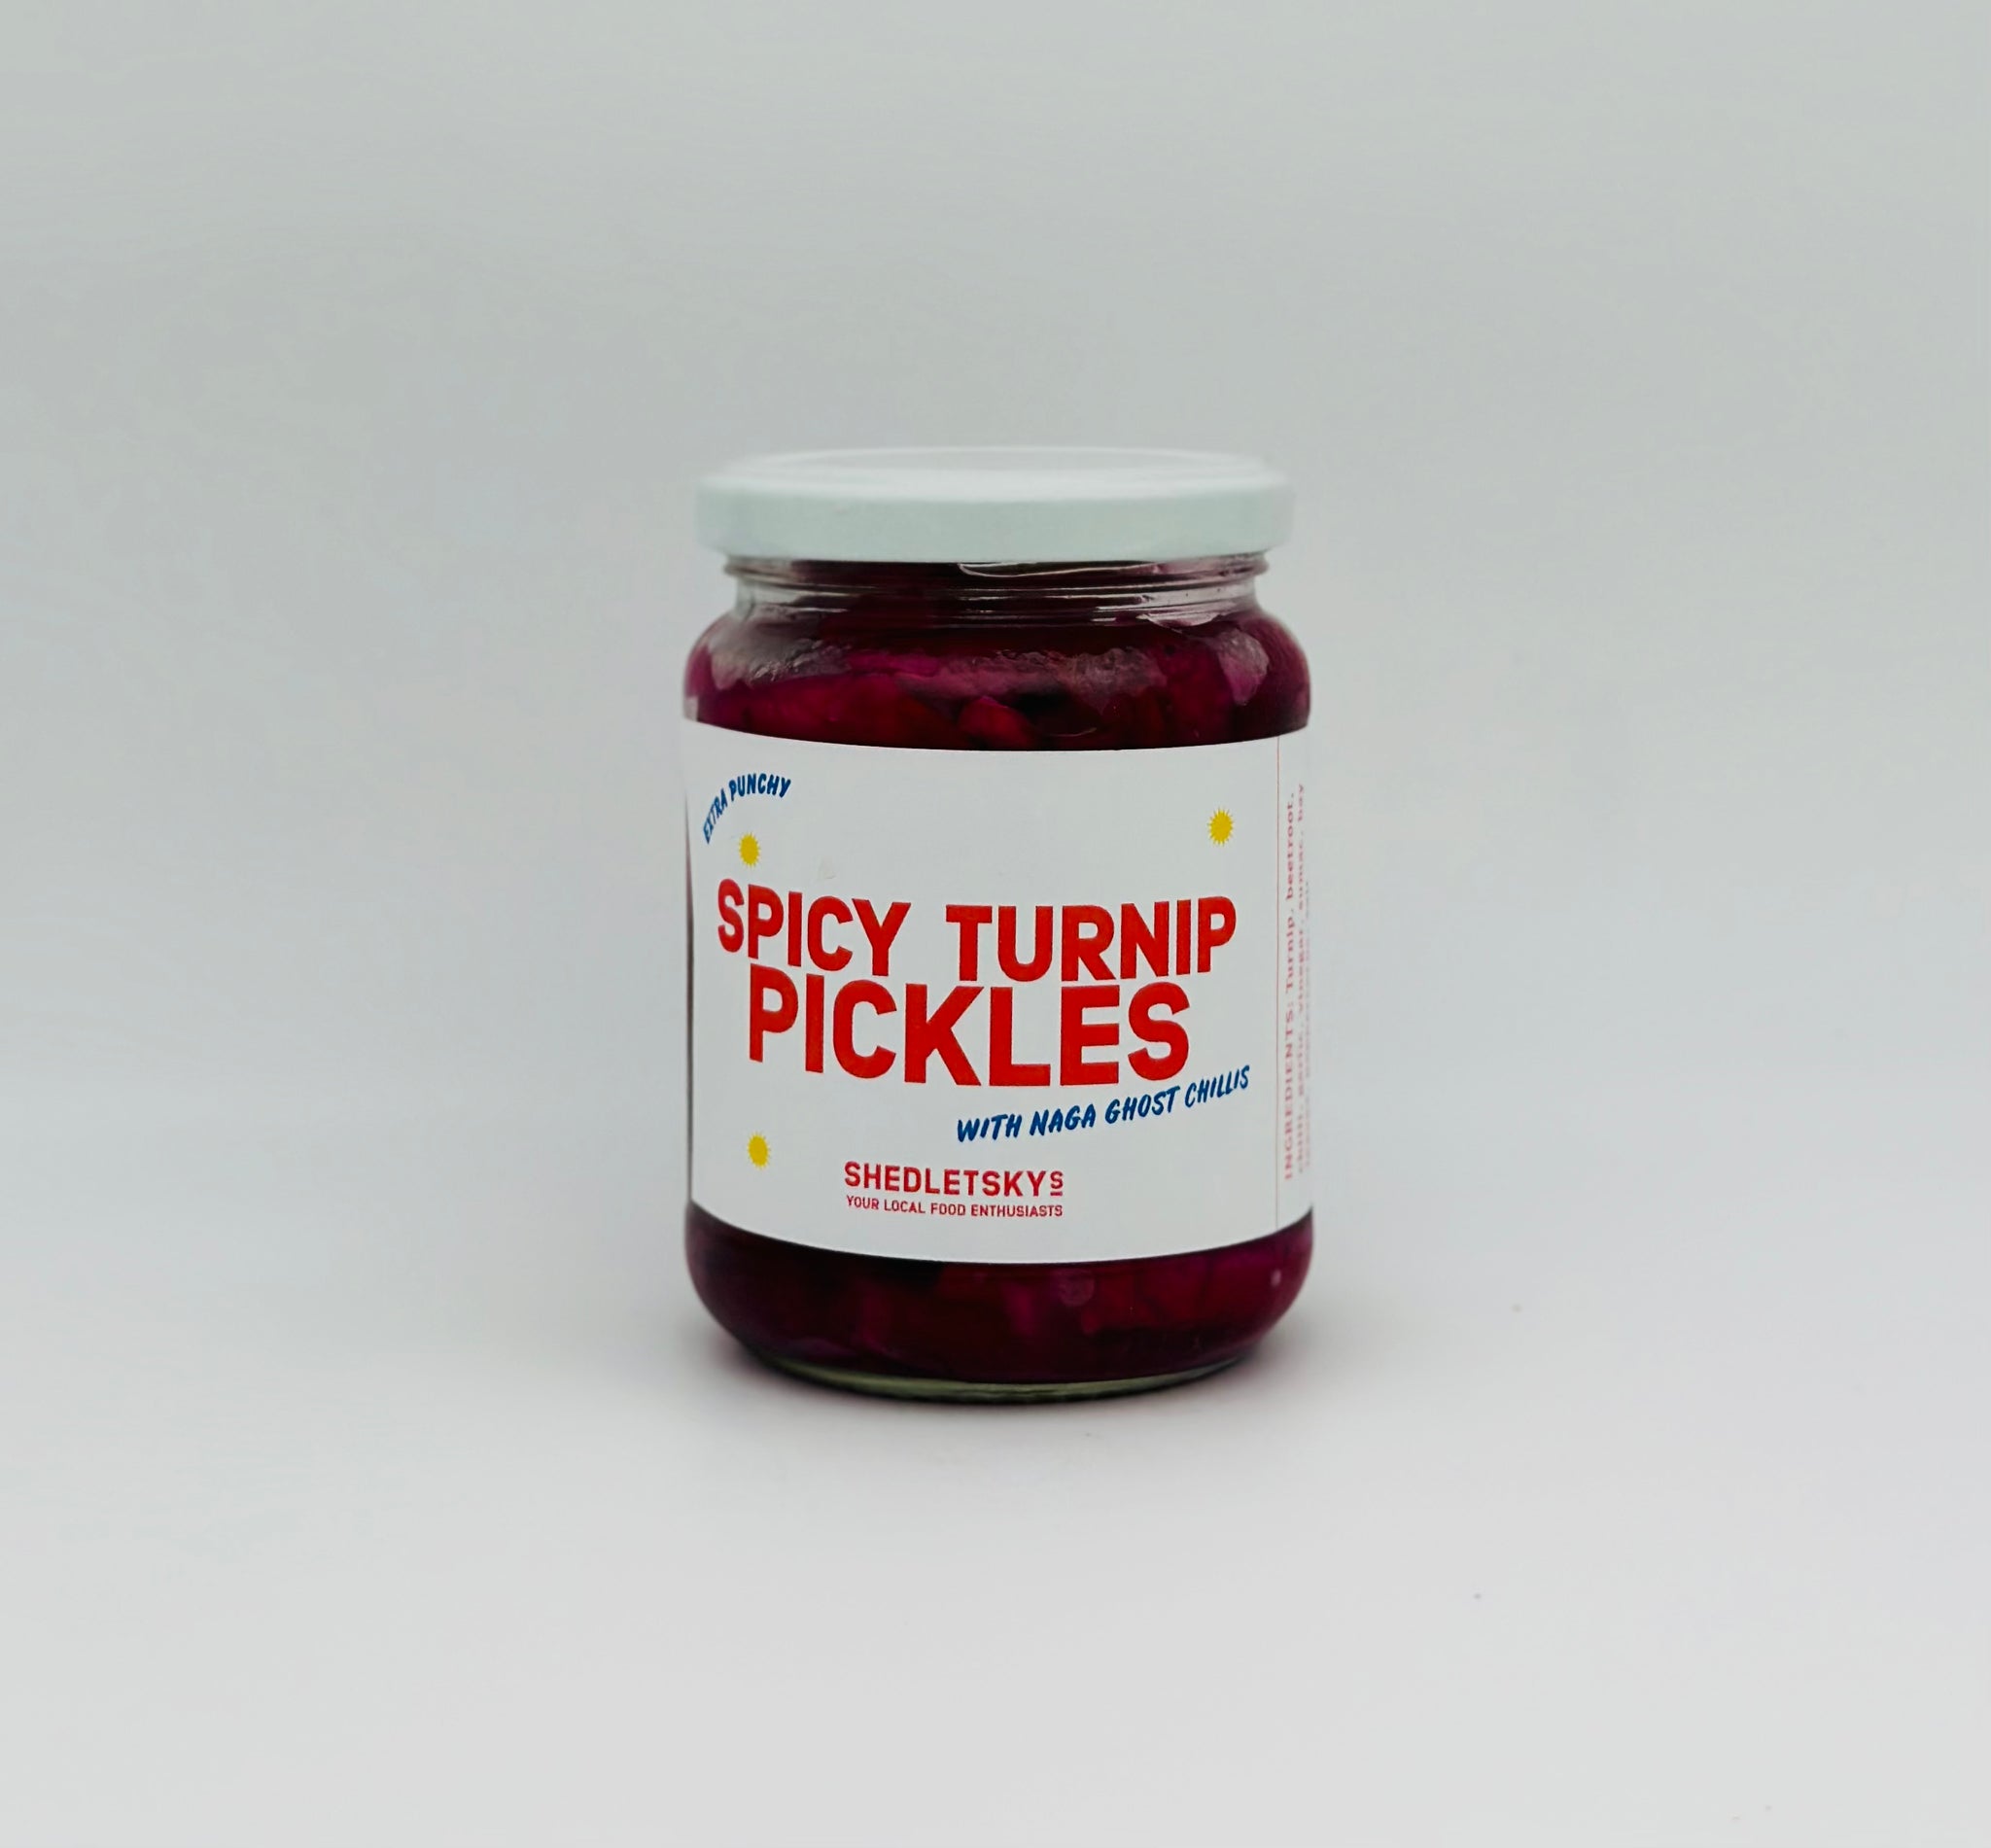 Shedletskys Spicy Turnip Pickles